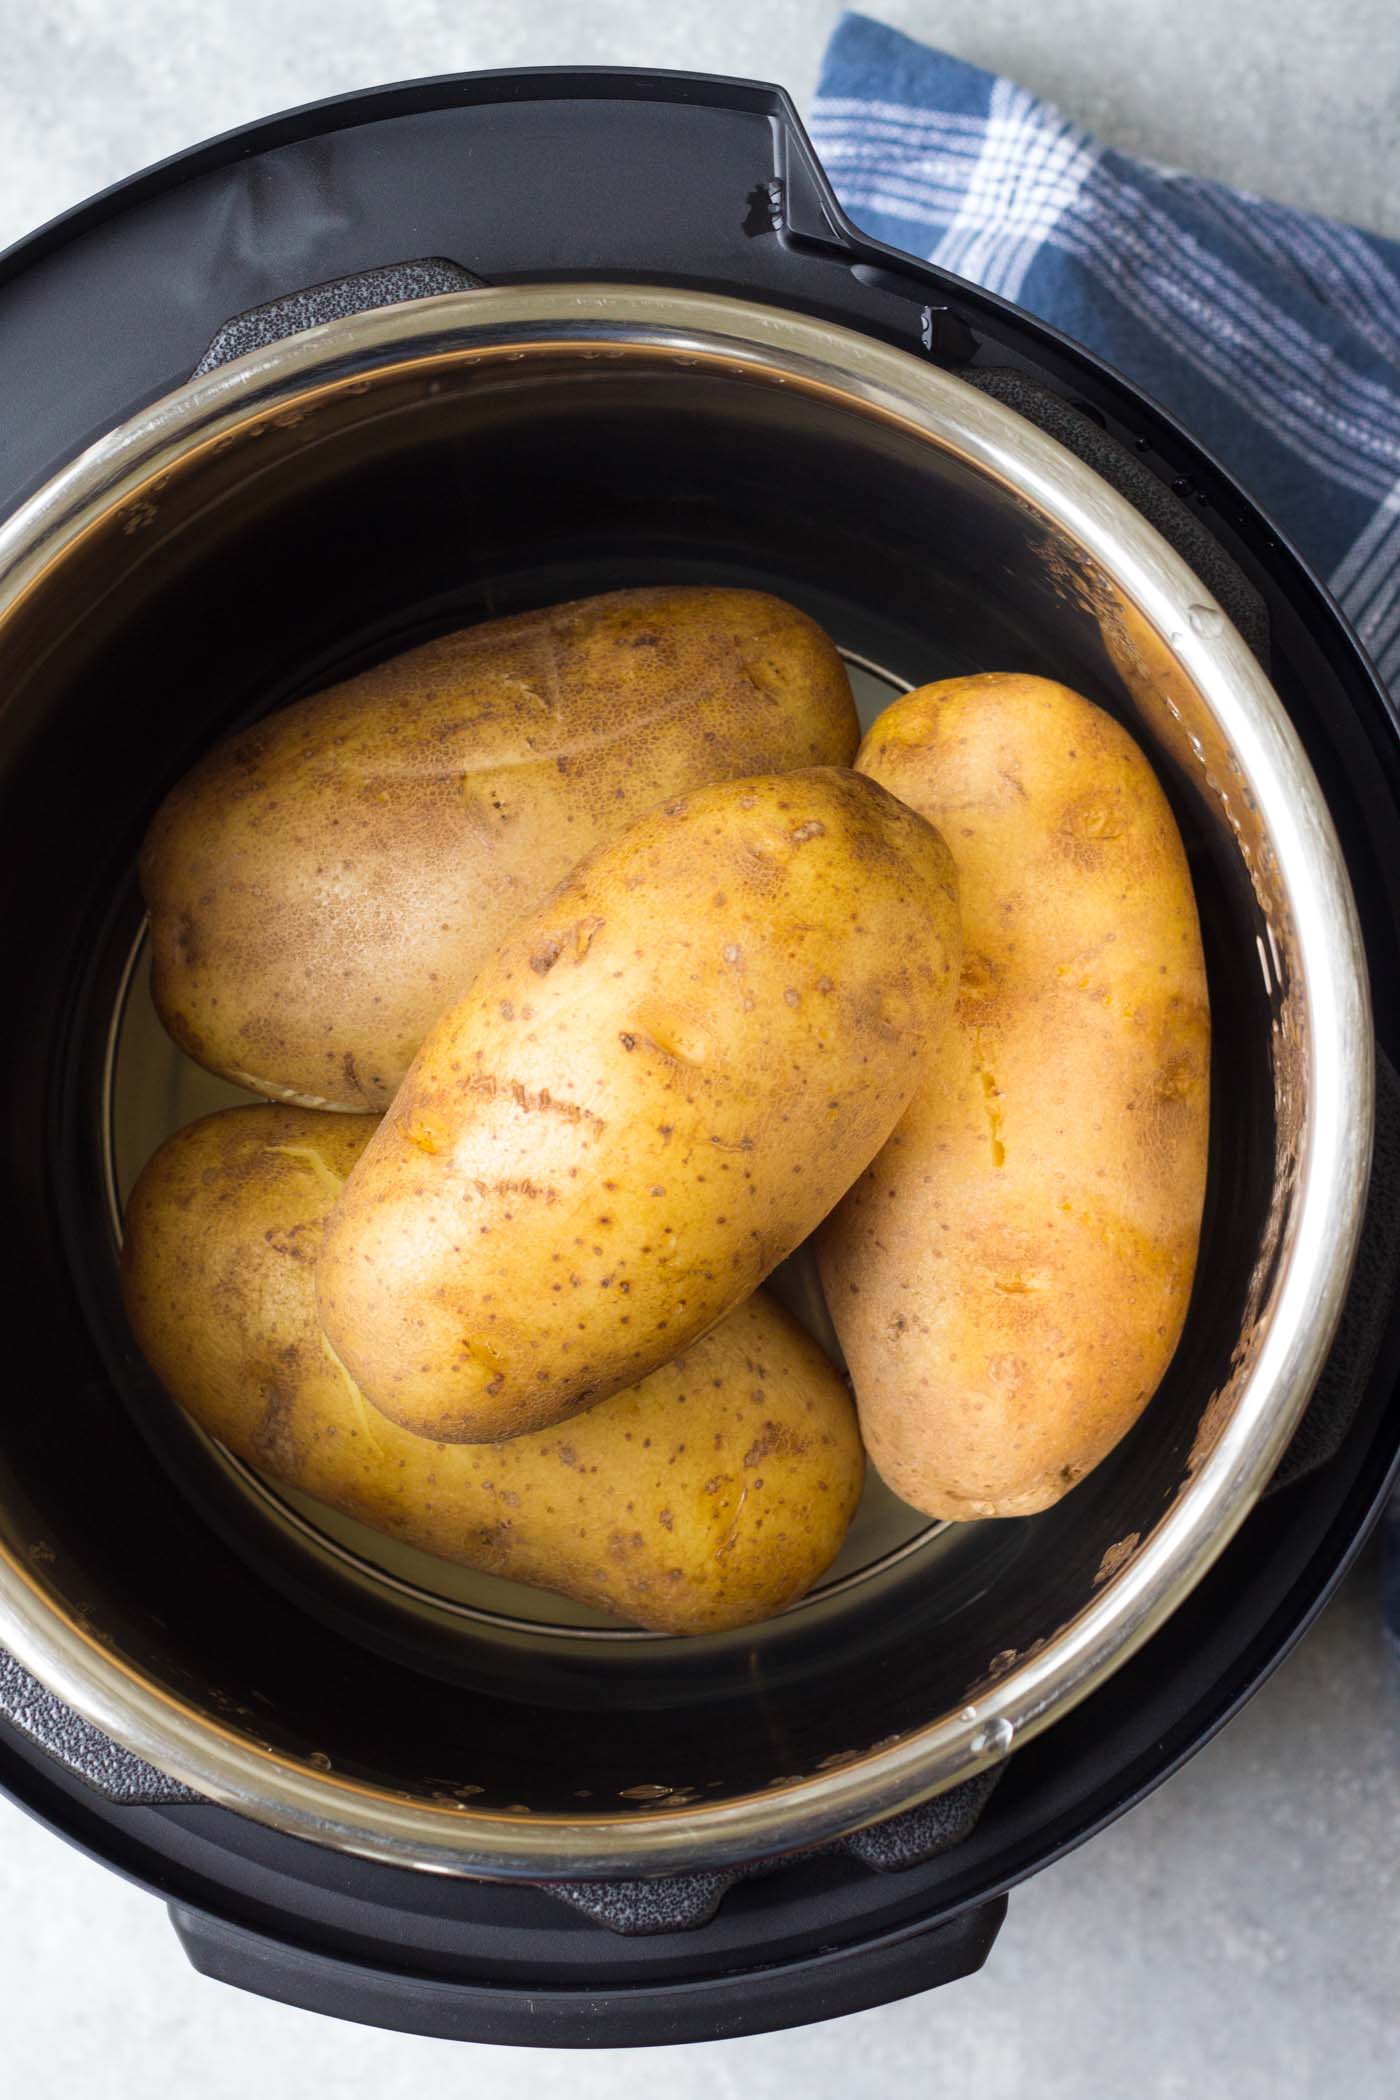 Four large baked potatoes in an instant pot.